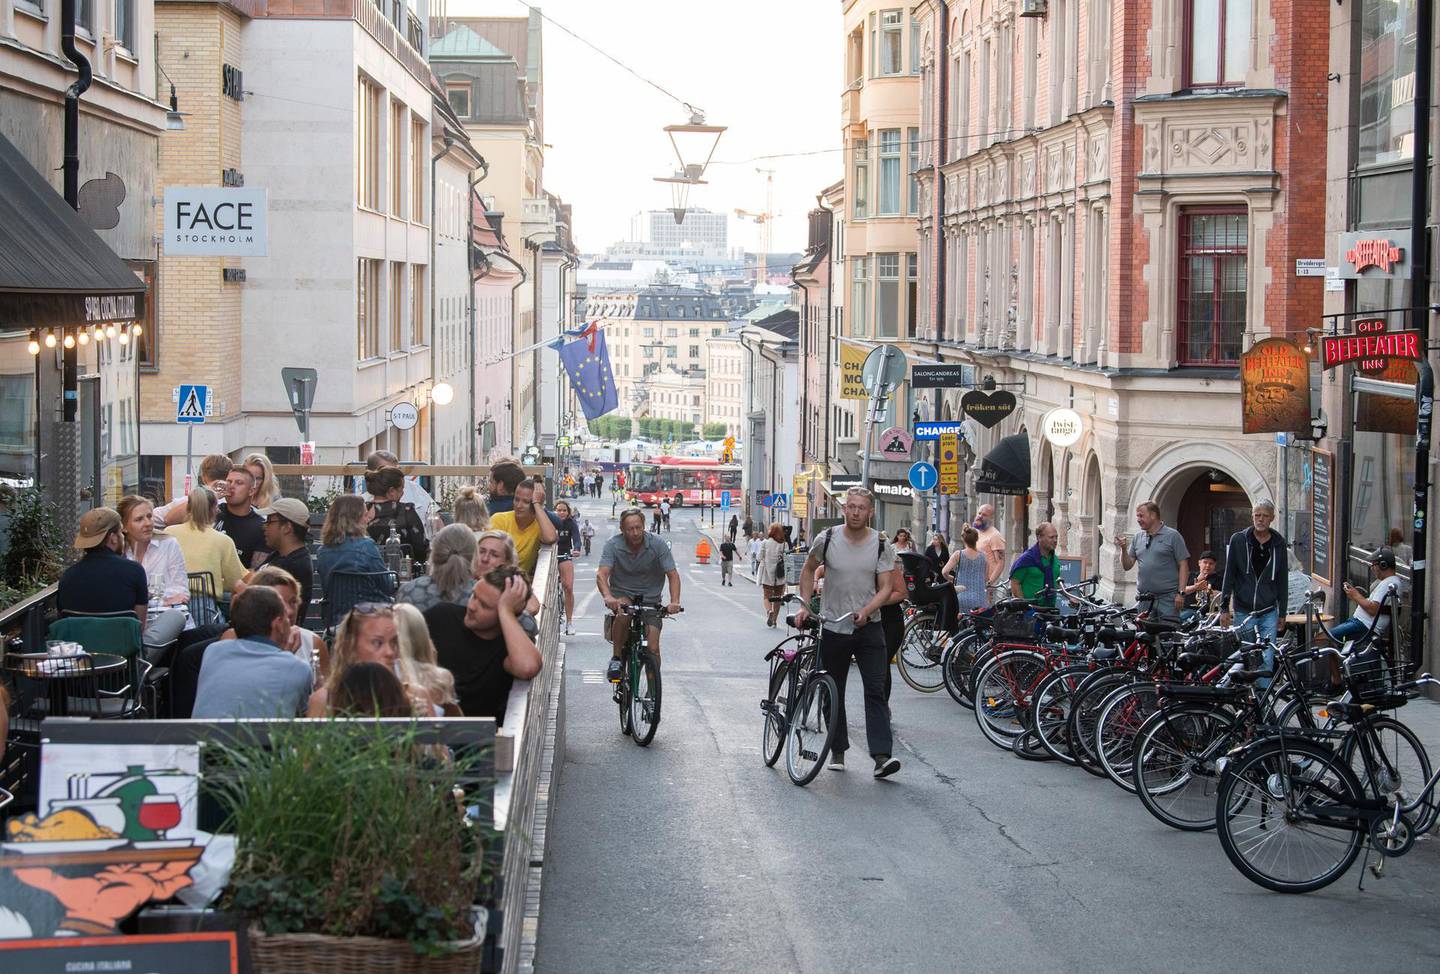 People with bicycles pass an outdoor restaurant on a street in the Sodermalm neighbourhood of Stockholm, Thursday, August 20, 2020. (Fredrik Sandberg/TT News Agency via AP)